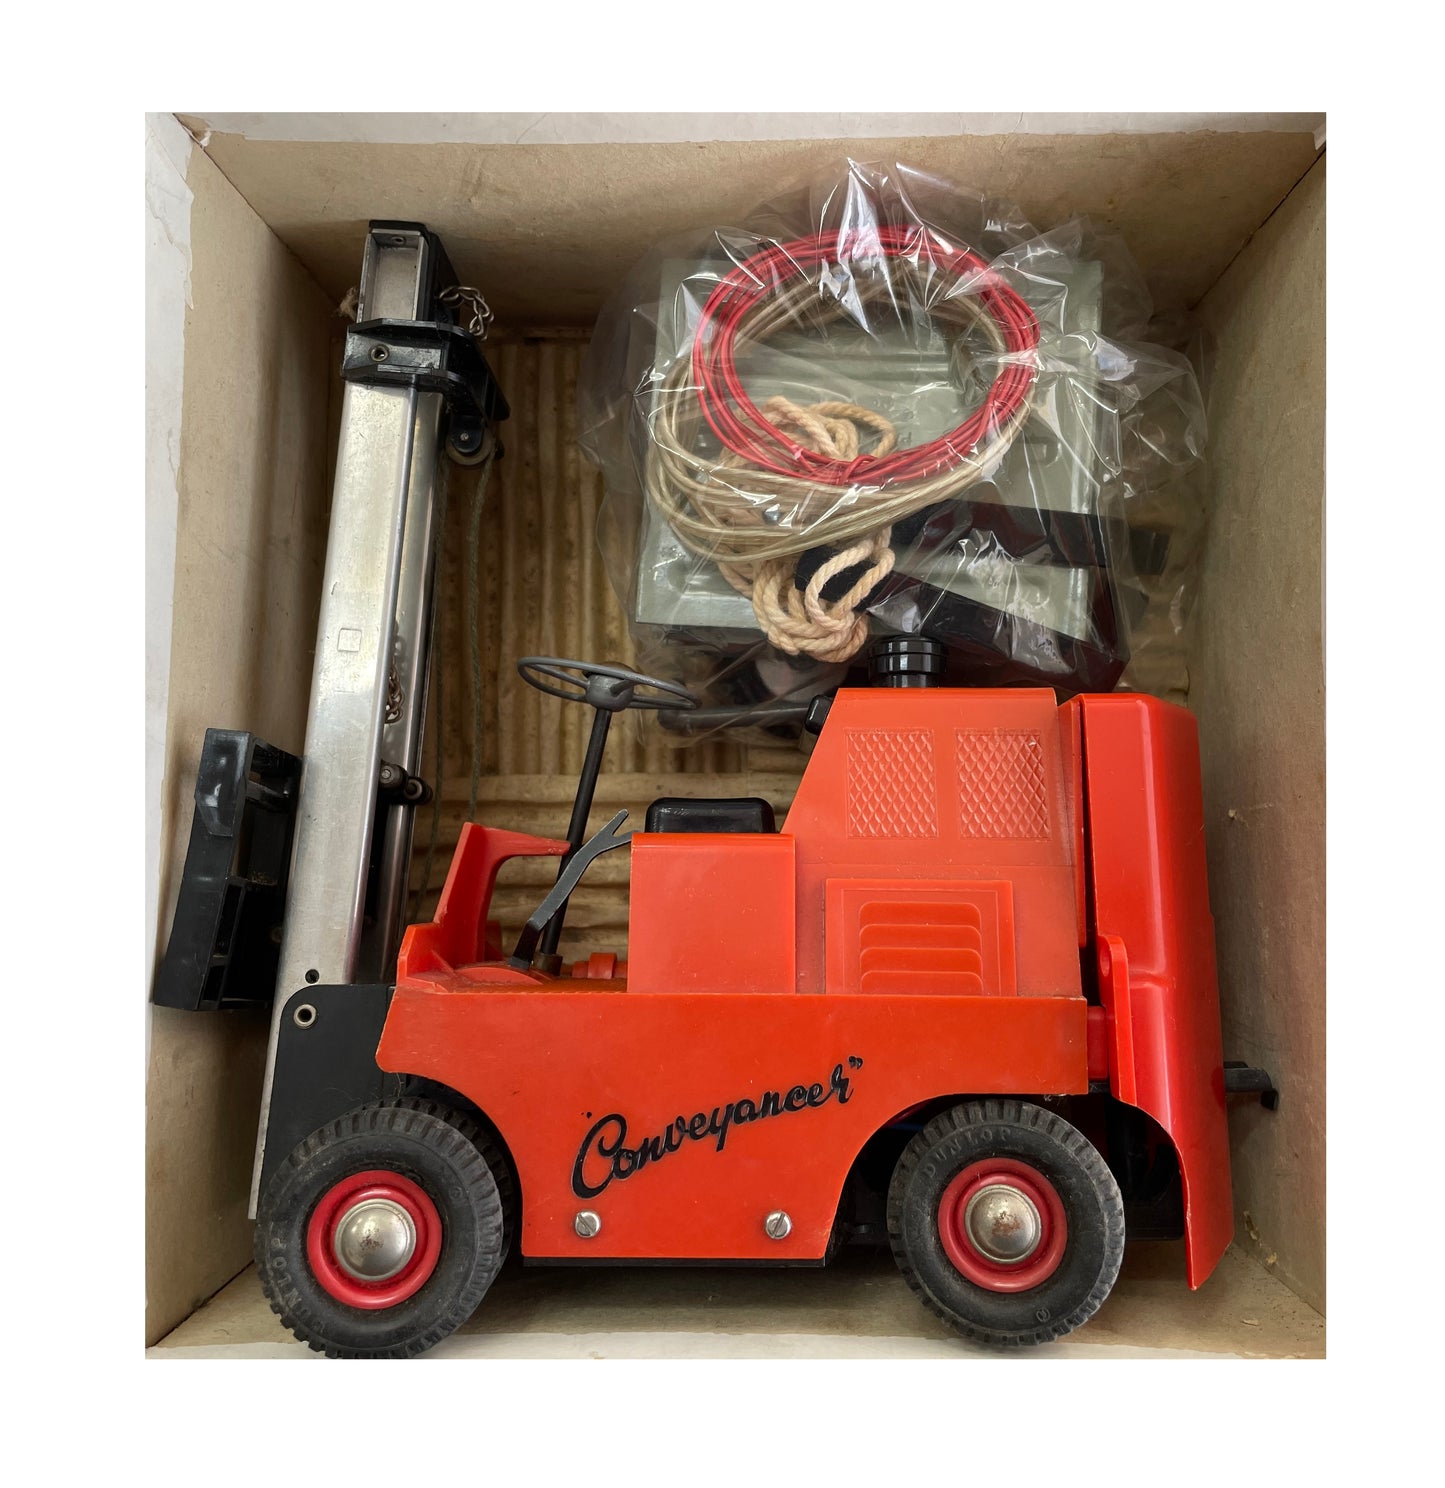 Vintage 1950's Victory Industries Conveyancer Fork Truck 1:14 Scale Battery Operated Model - In The Original Box.